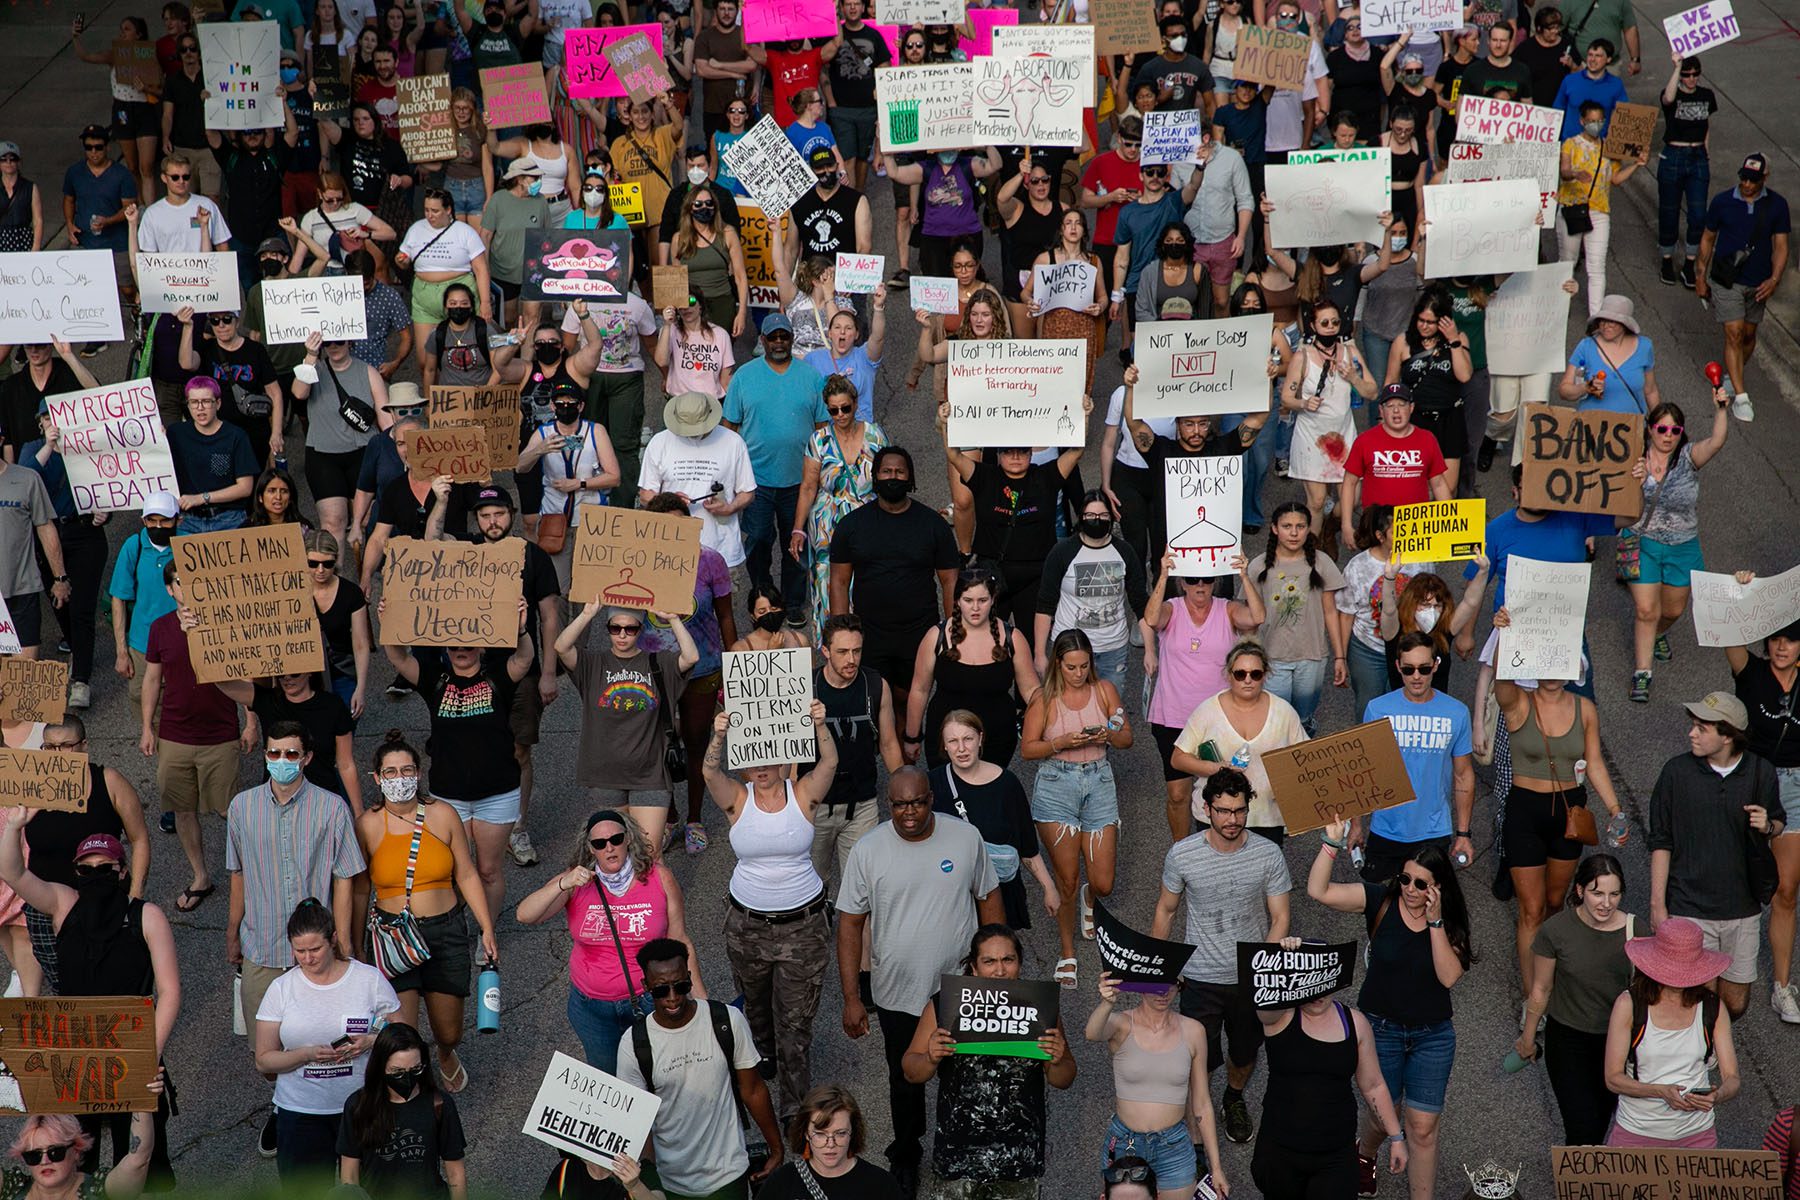 People gather to protest against the the Supreme Court's decision in the Dobbs v Jackson Women's Health case on June 24, 2022 in Raleigh, North Carolina.